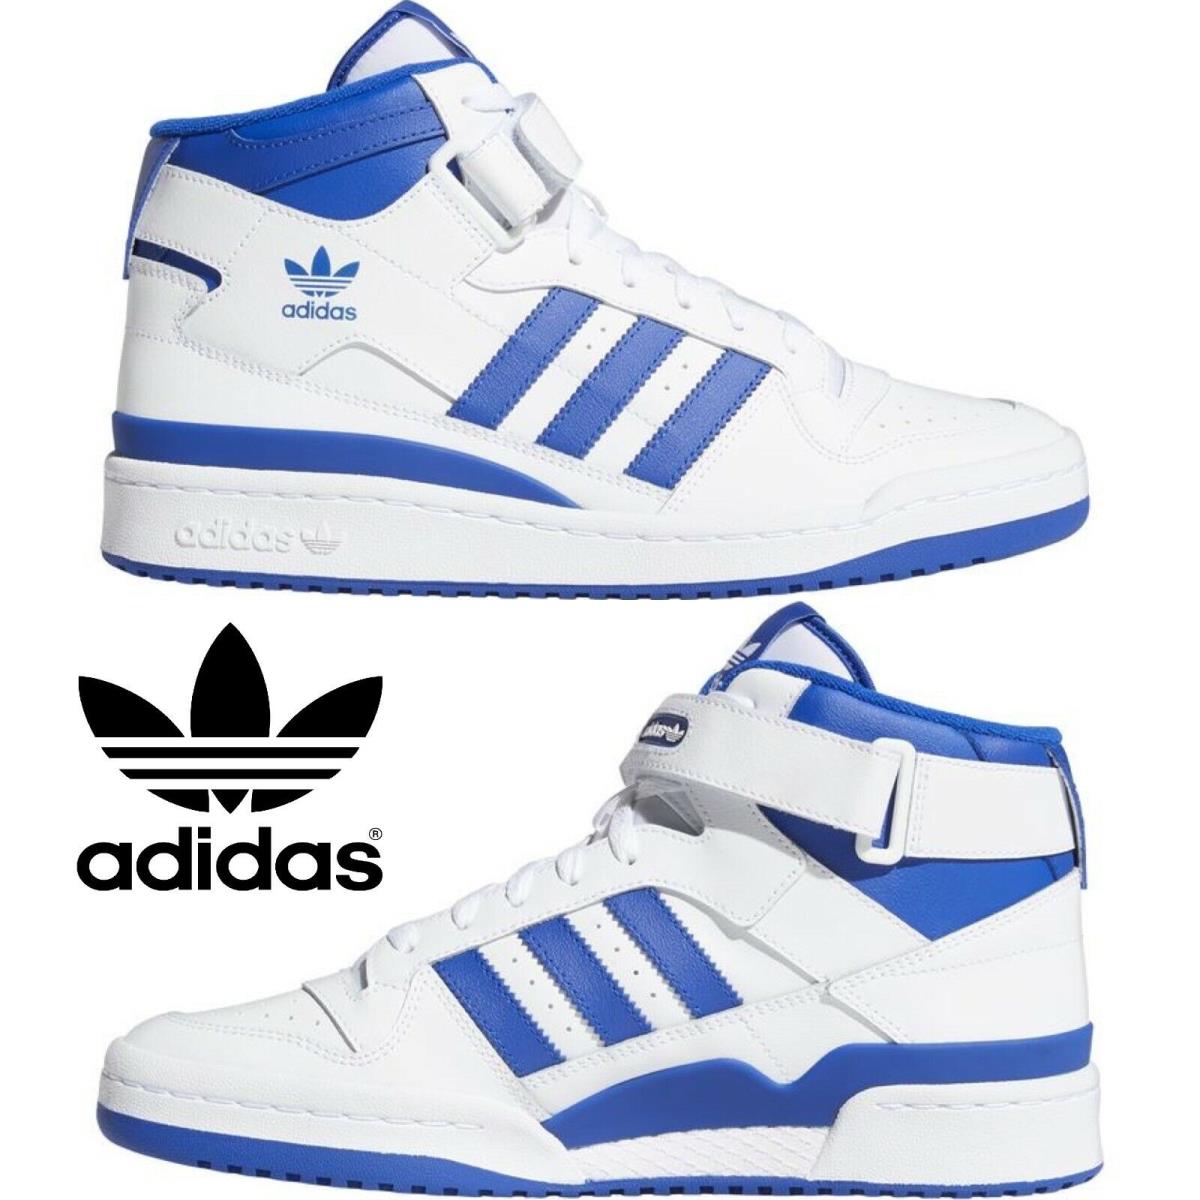 Adidas Originals Forum Mid Men`s Sneakers Comfort Casual Shoes High Top White - White , White/Team Royal Blue/White Manufacturer